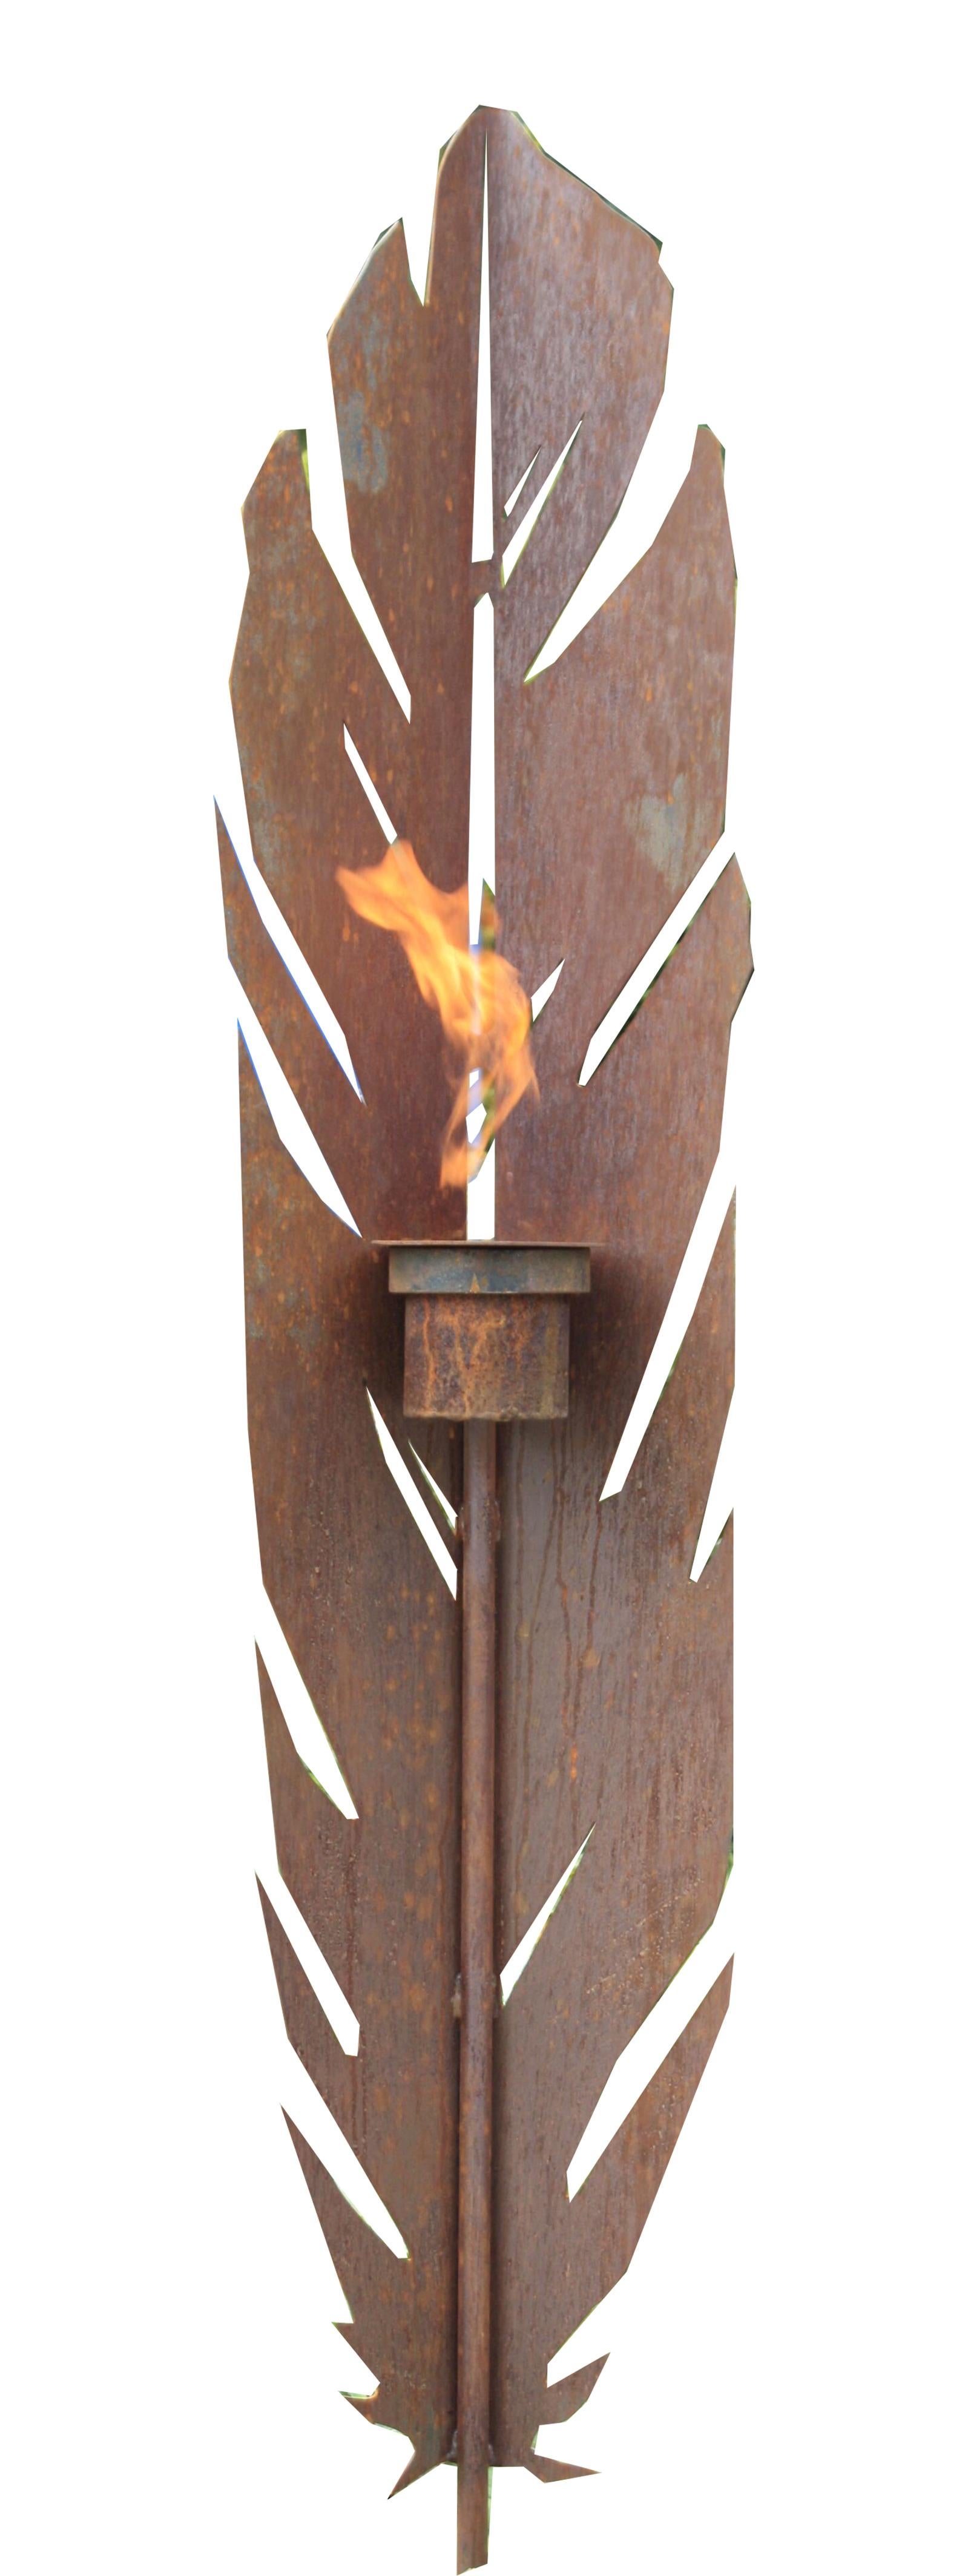 Outdoor Garden Torch - "Feather" - unique ornament - Mixed Media Art by Stefan Traloc